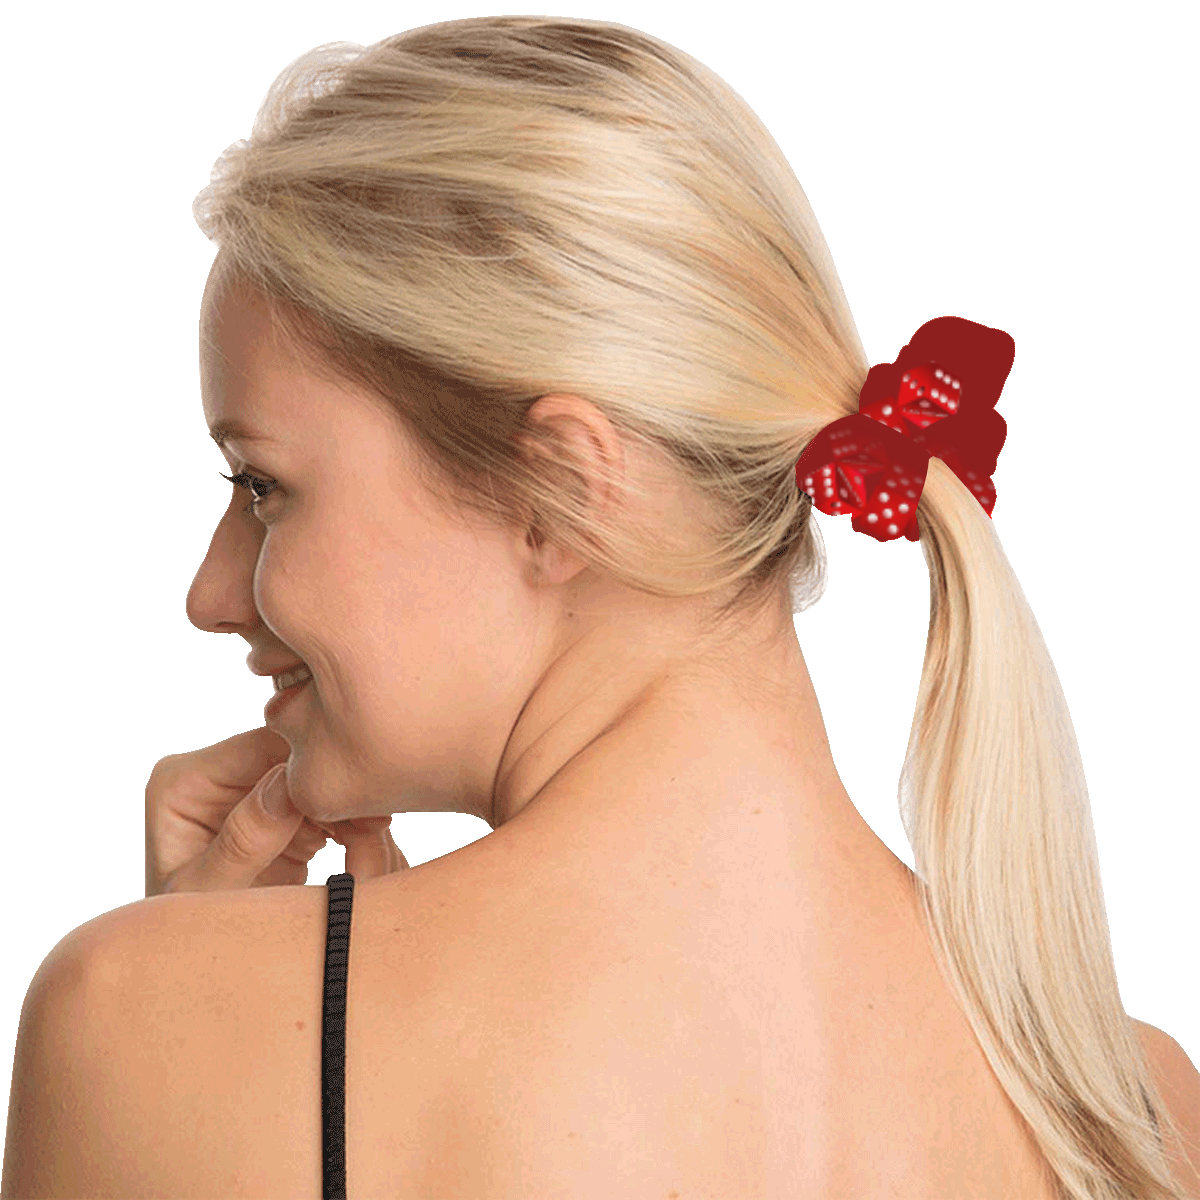 Las Vegas Craps Dice on Red All Over Print Hair Scrunchie